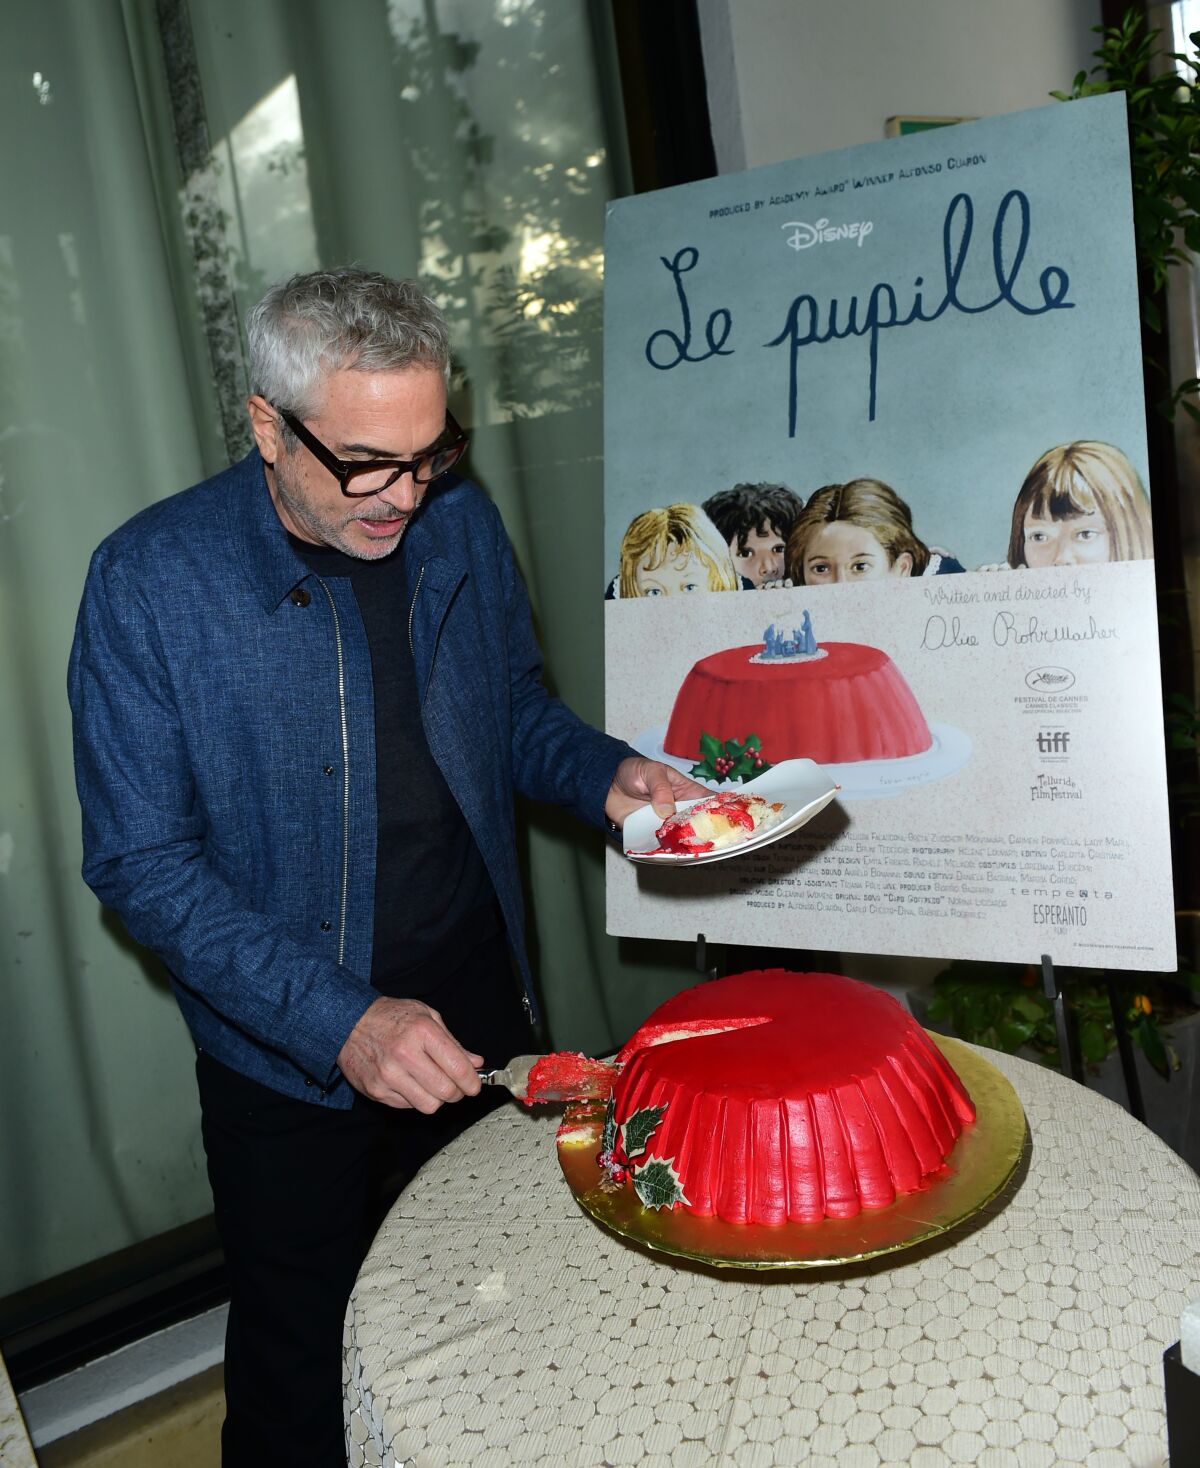 Director Alfonso Cuarón takes a slice of cake beneath a poster for the short film "Le Pupille."